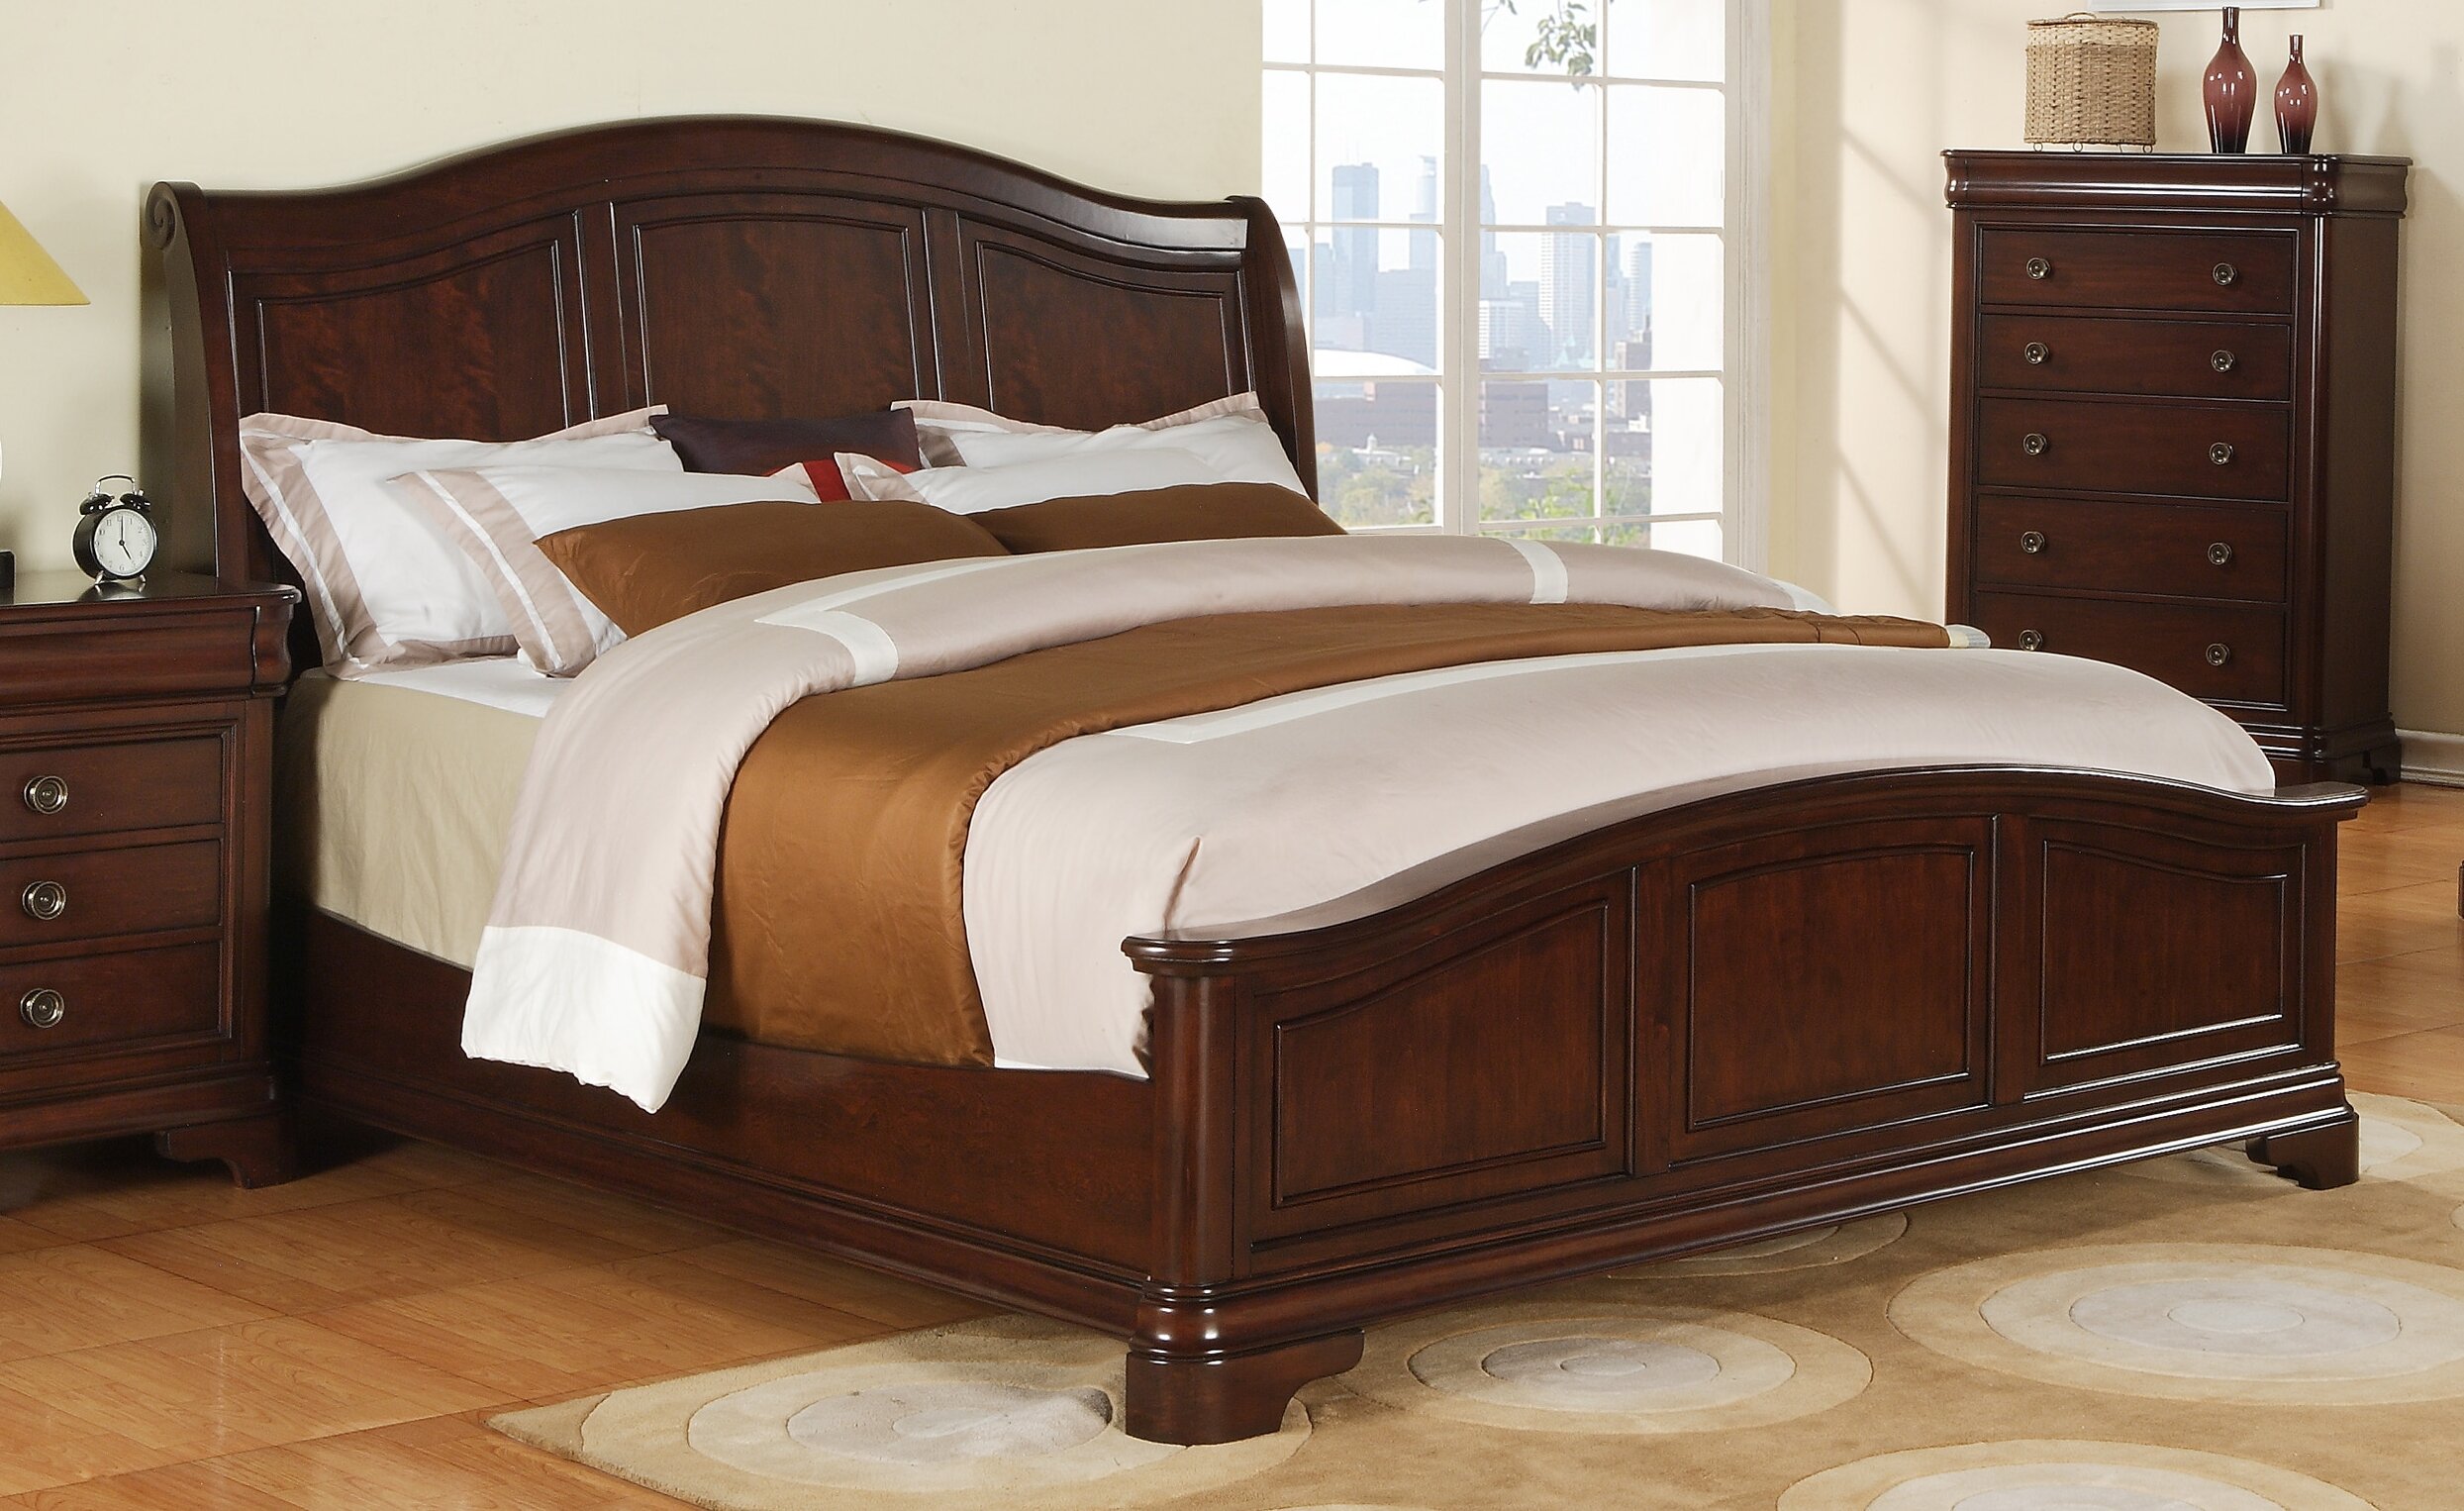 Wayfair Cherry Wood Beds You Ll Love In 2021